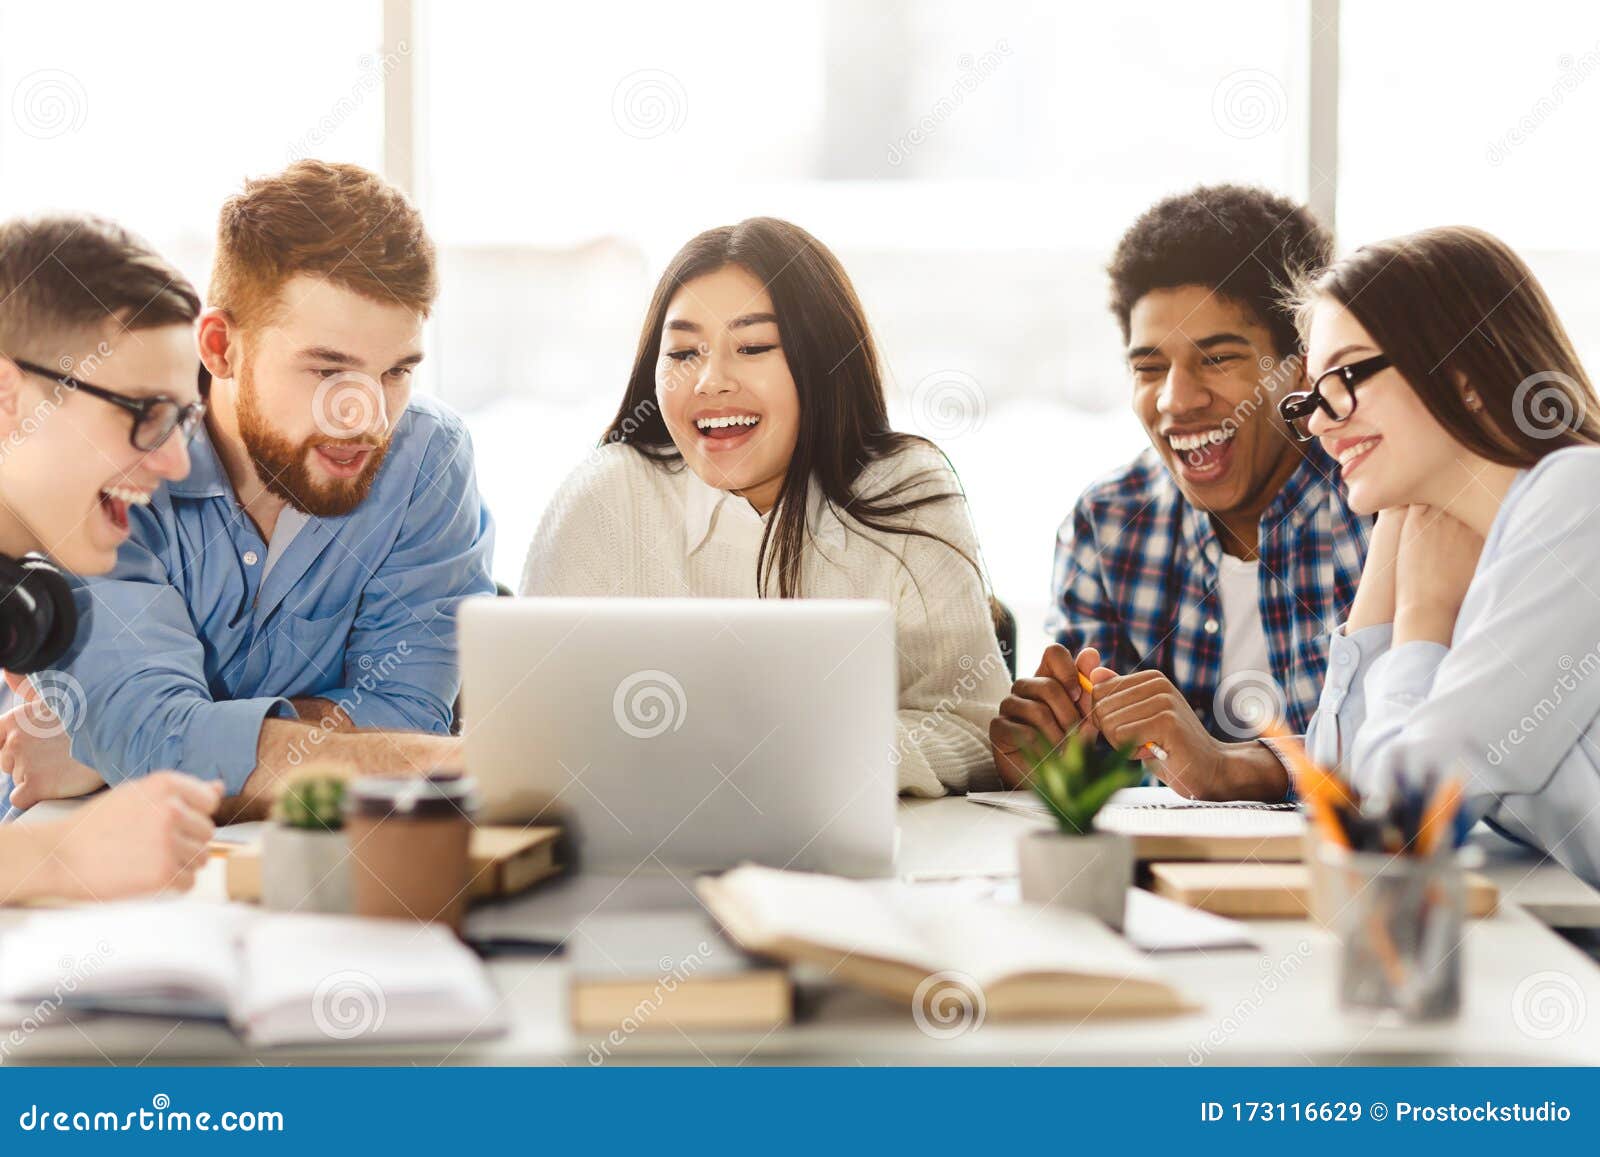 Online Education. Group of Students Studying on Computer Stock Image -  Image of office, education: 173116629